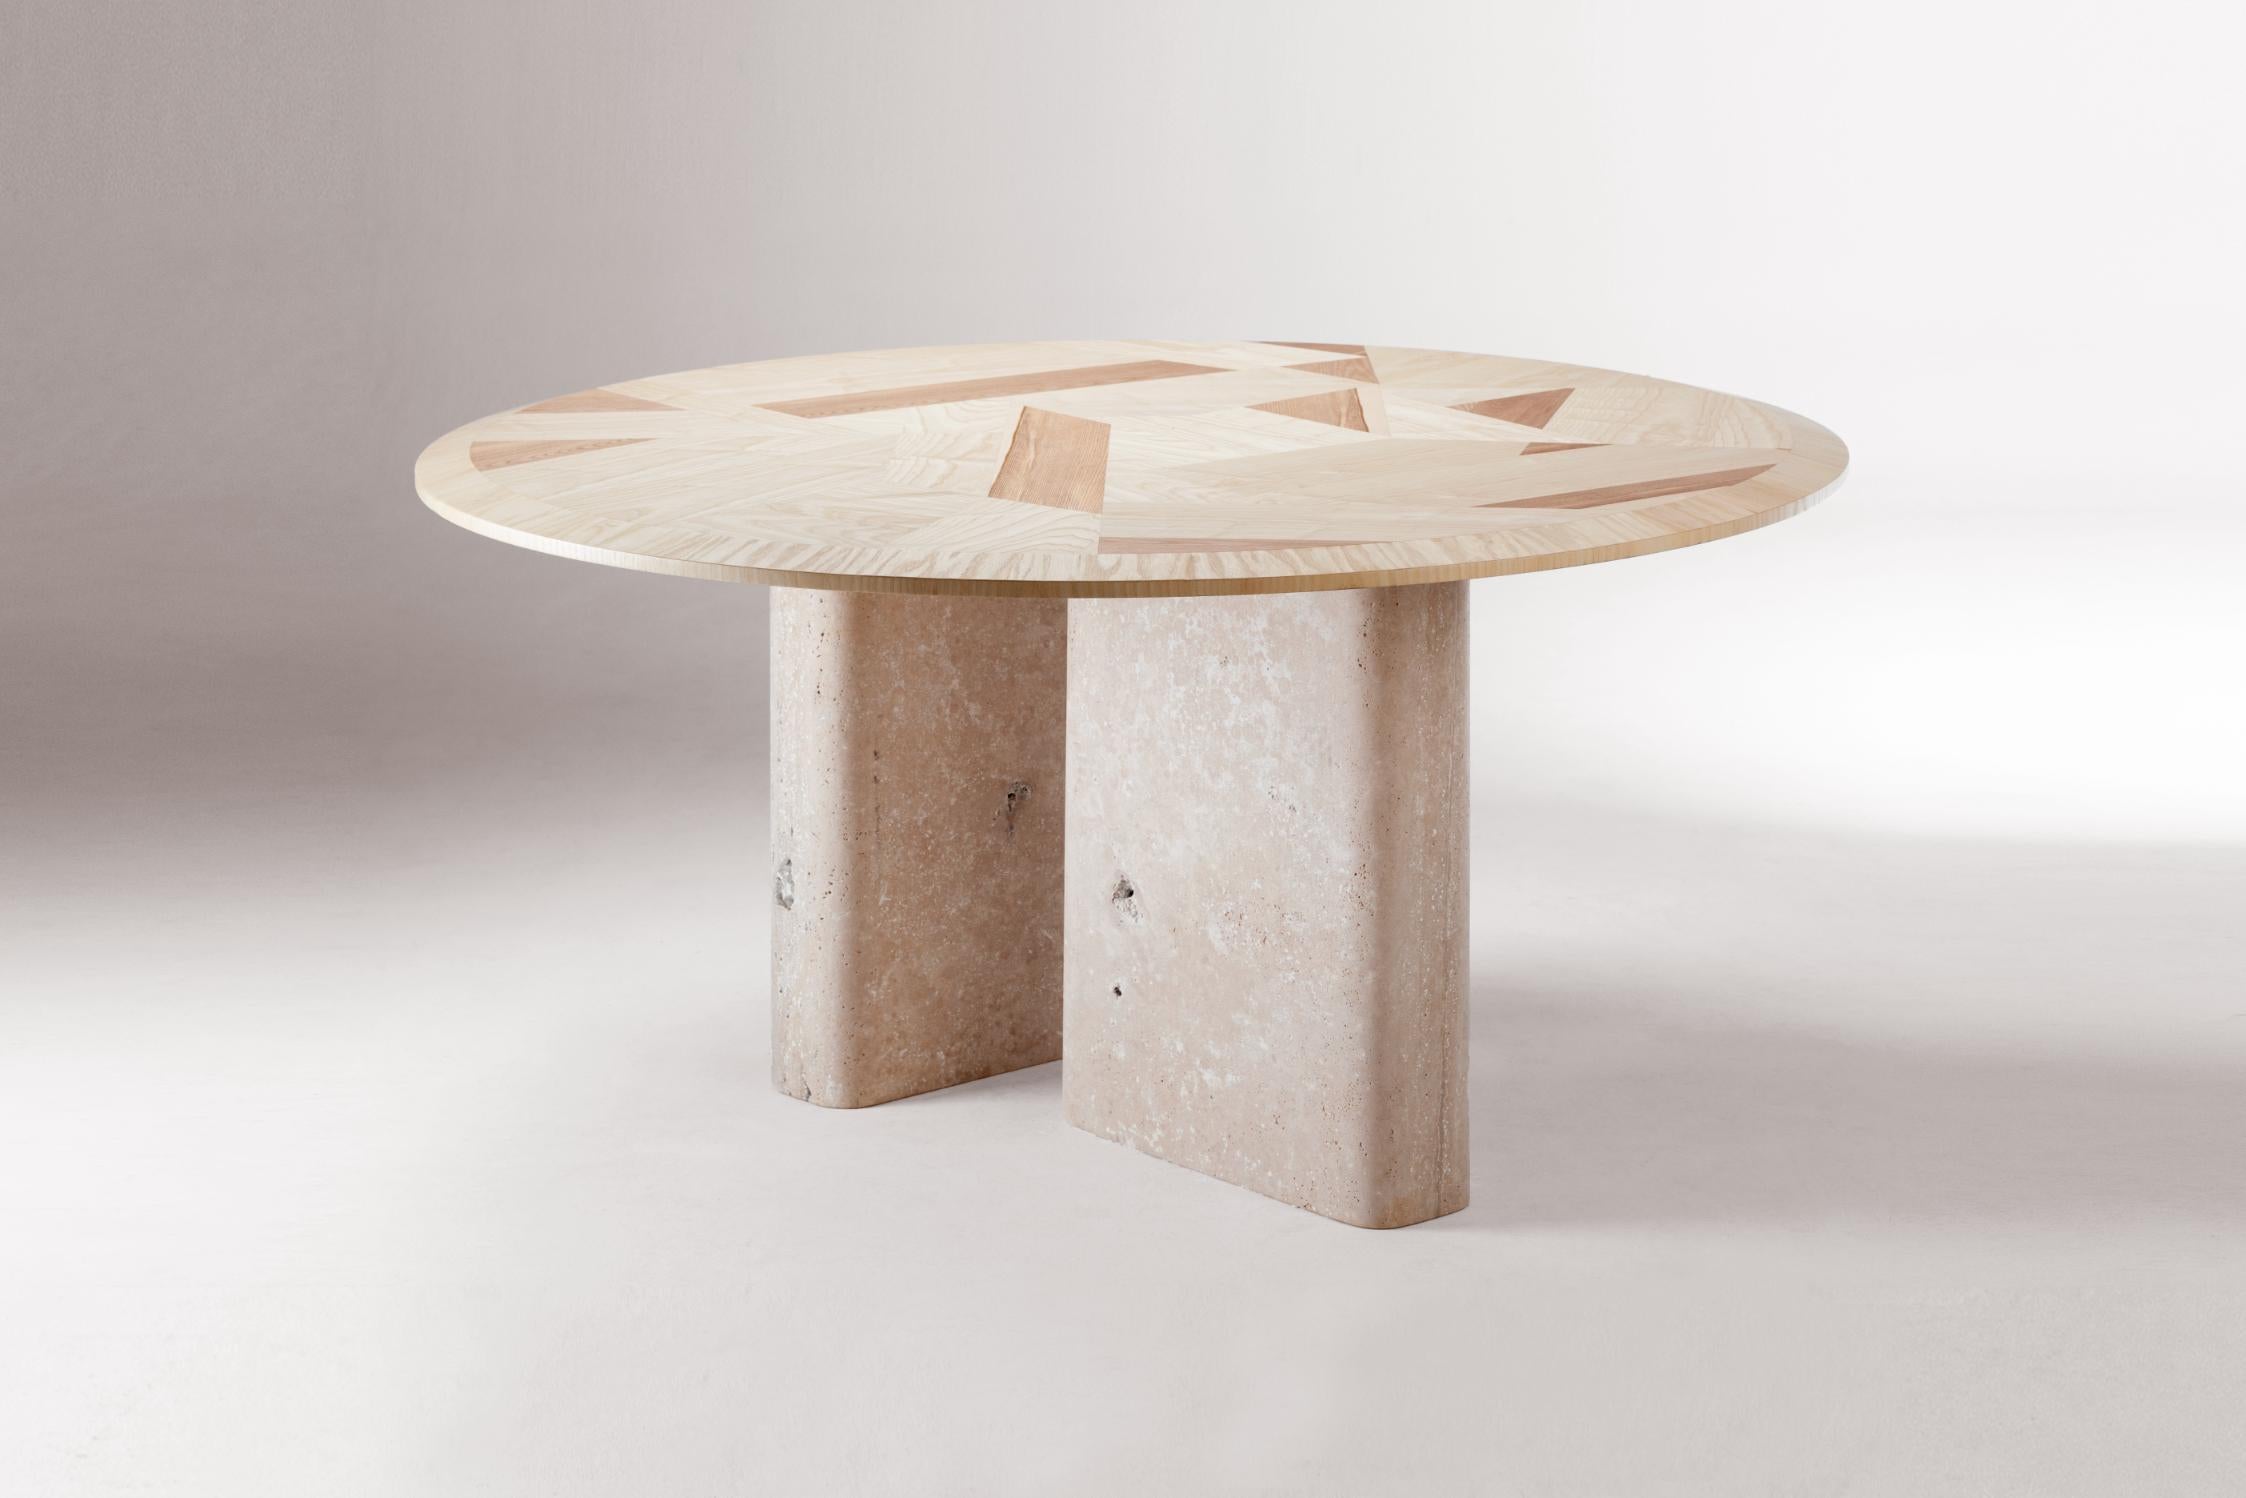 L’anamour dinner table by Dooq
Dimensions: ø 150 x H 78 cm
Materials: Ash wood, natural travertine.

L’anamour is a dining table where the connection between the base and the top is as perfect as a poet-muse relationship?, ?with emotions flying